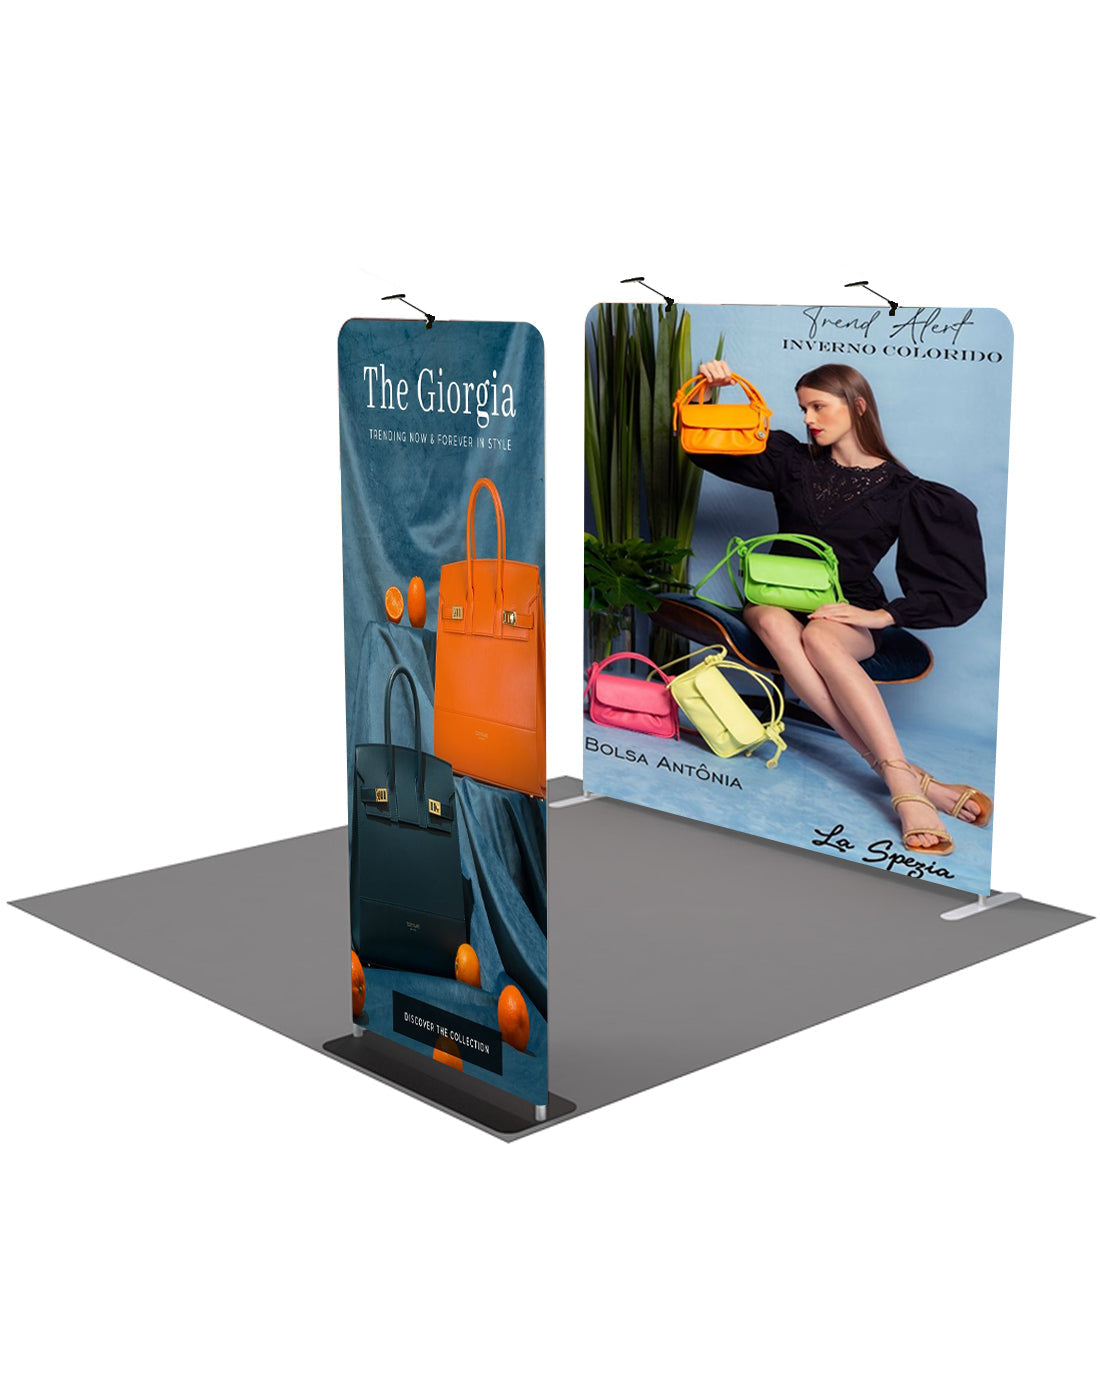 EZ Exhibit Essentials: 10ftx10ft Booth Kit with Backwall and Banner Stand